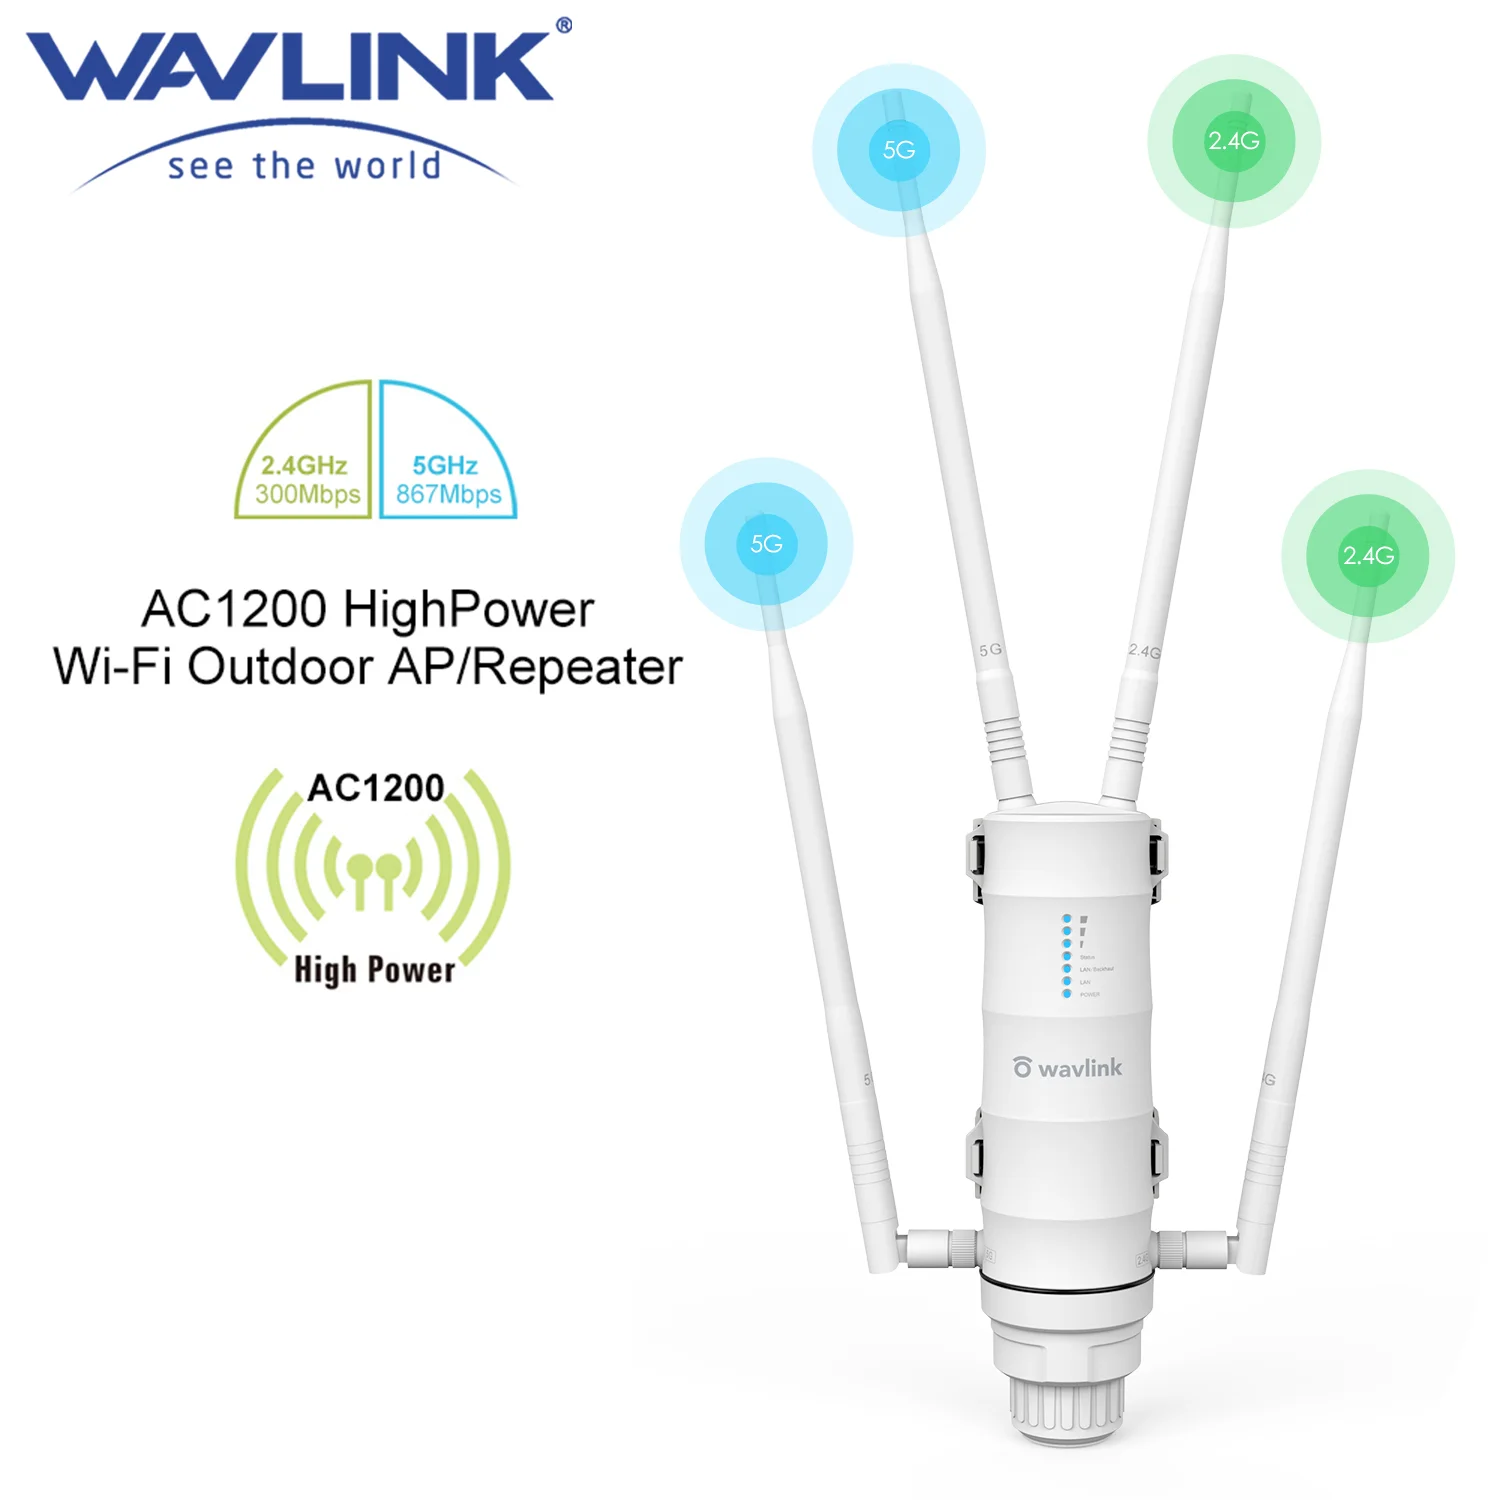 Wavlink AC1200 High Power Wi-Fi Outdoor AP/Repeater/Router with PoE and High Gain 2.4G&5G Antennas wifi range extender amplifier